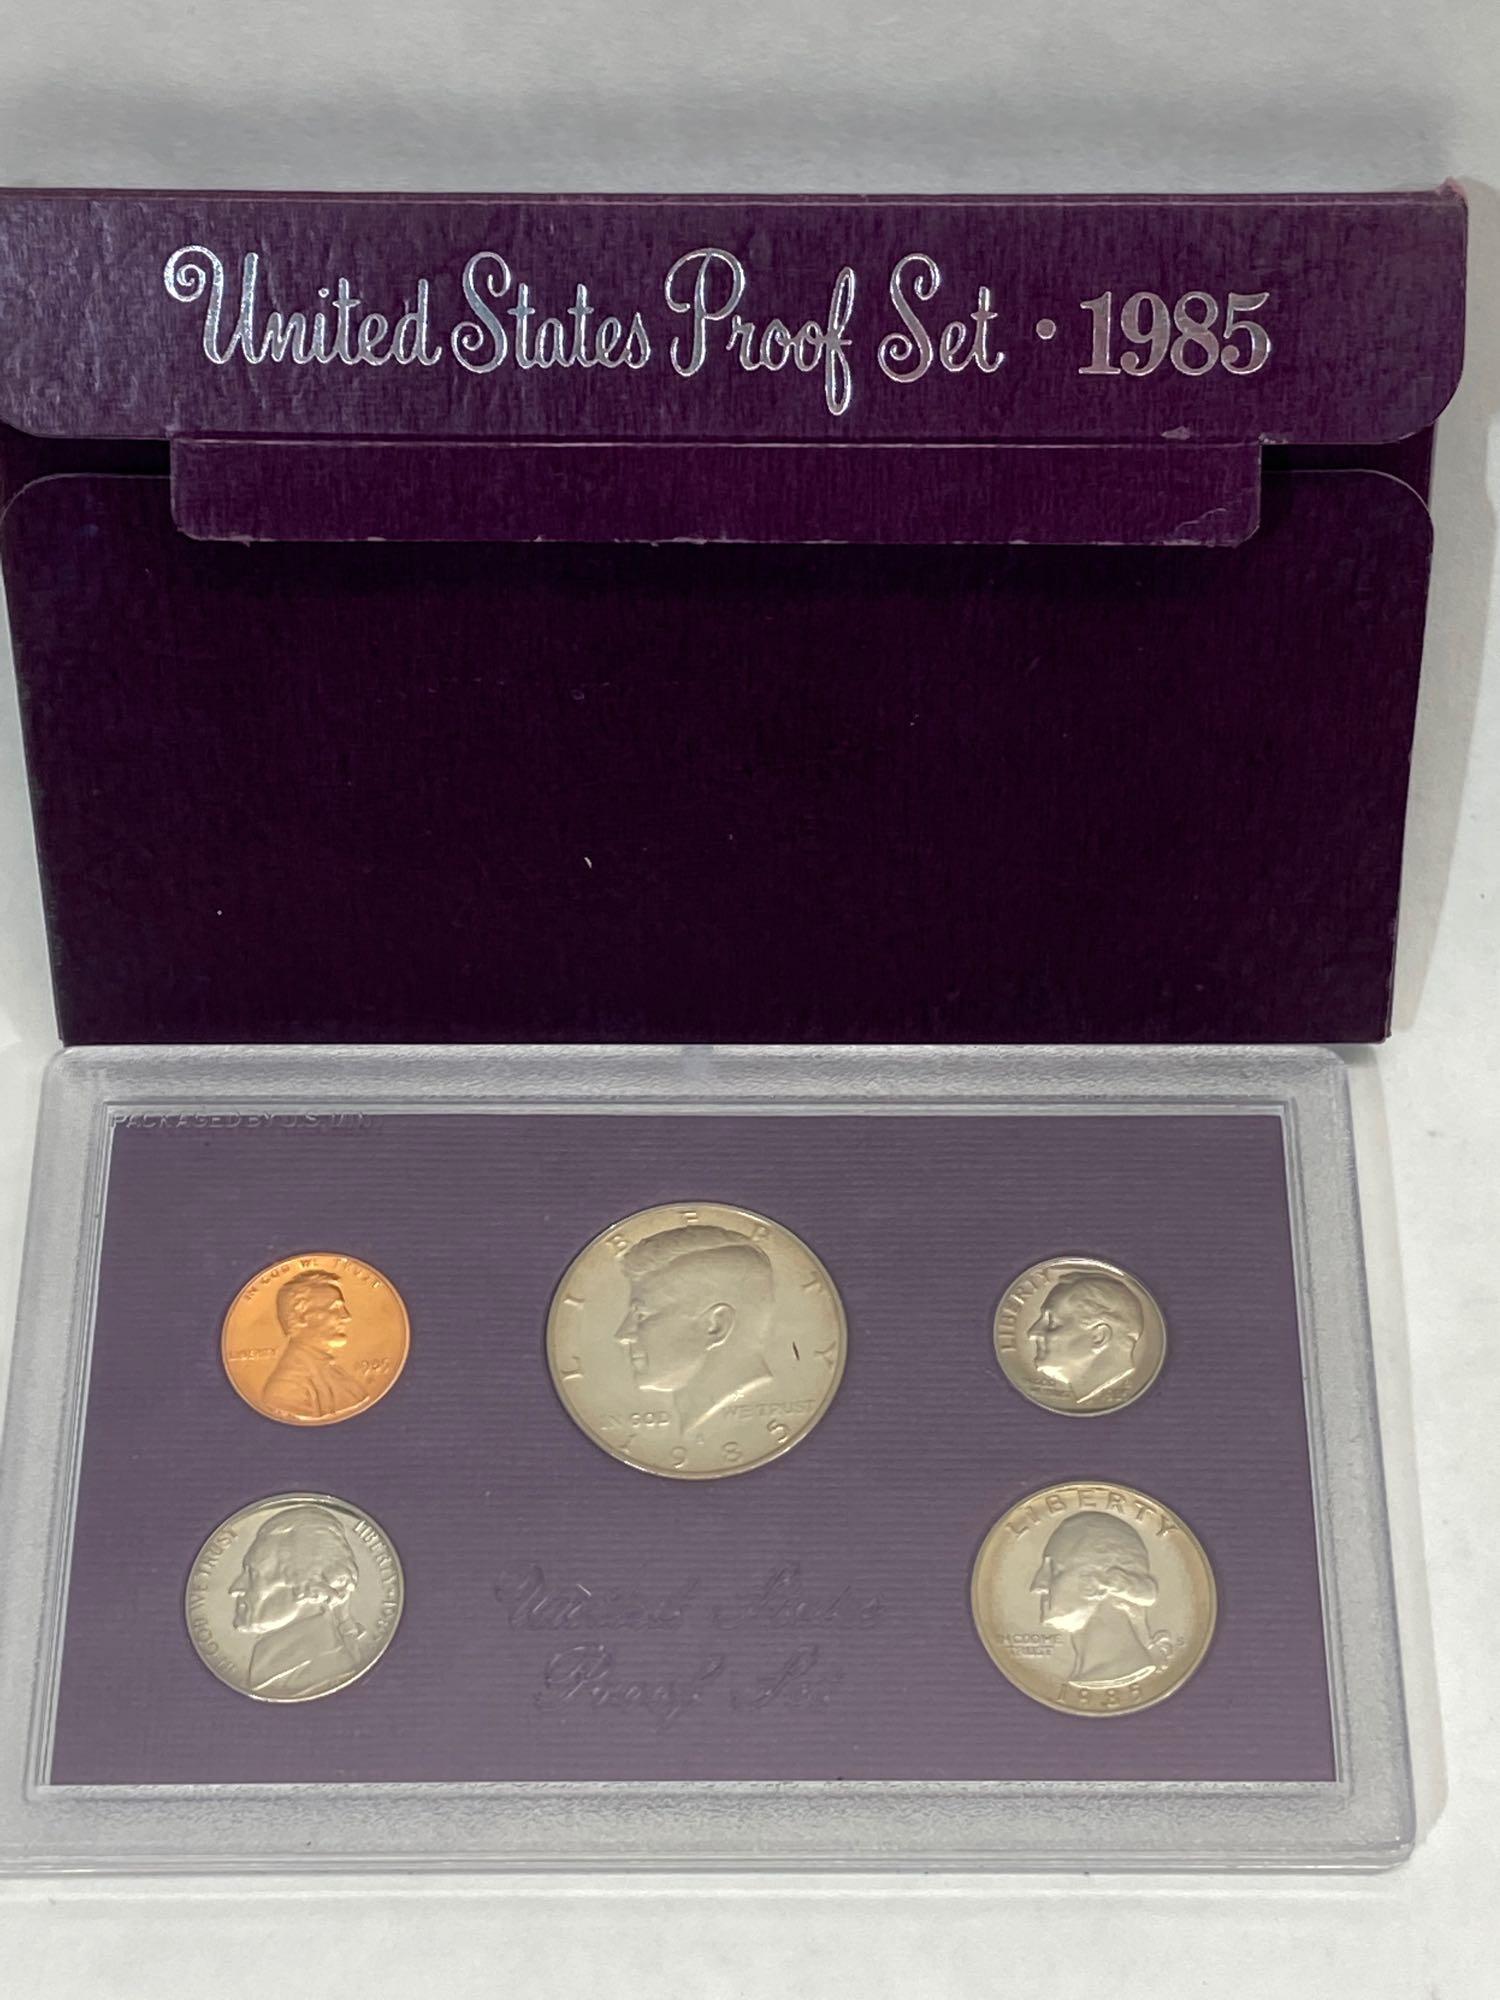 9 United States Mint Proof Sets of Coins 1985, 1986, 1987, 1988, 1989, 1990, 1991, 1992, 1993